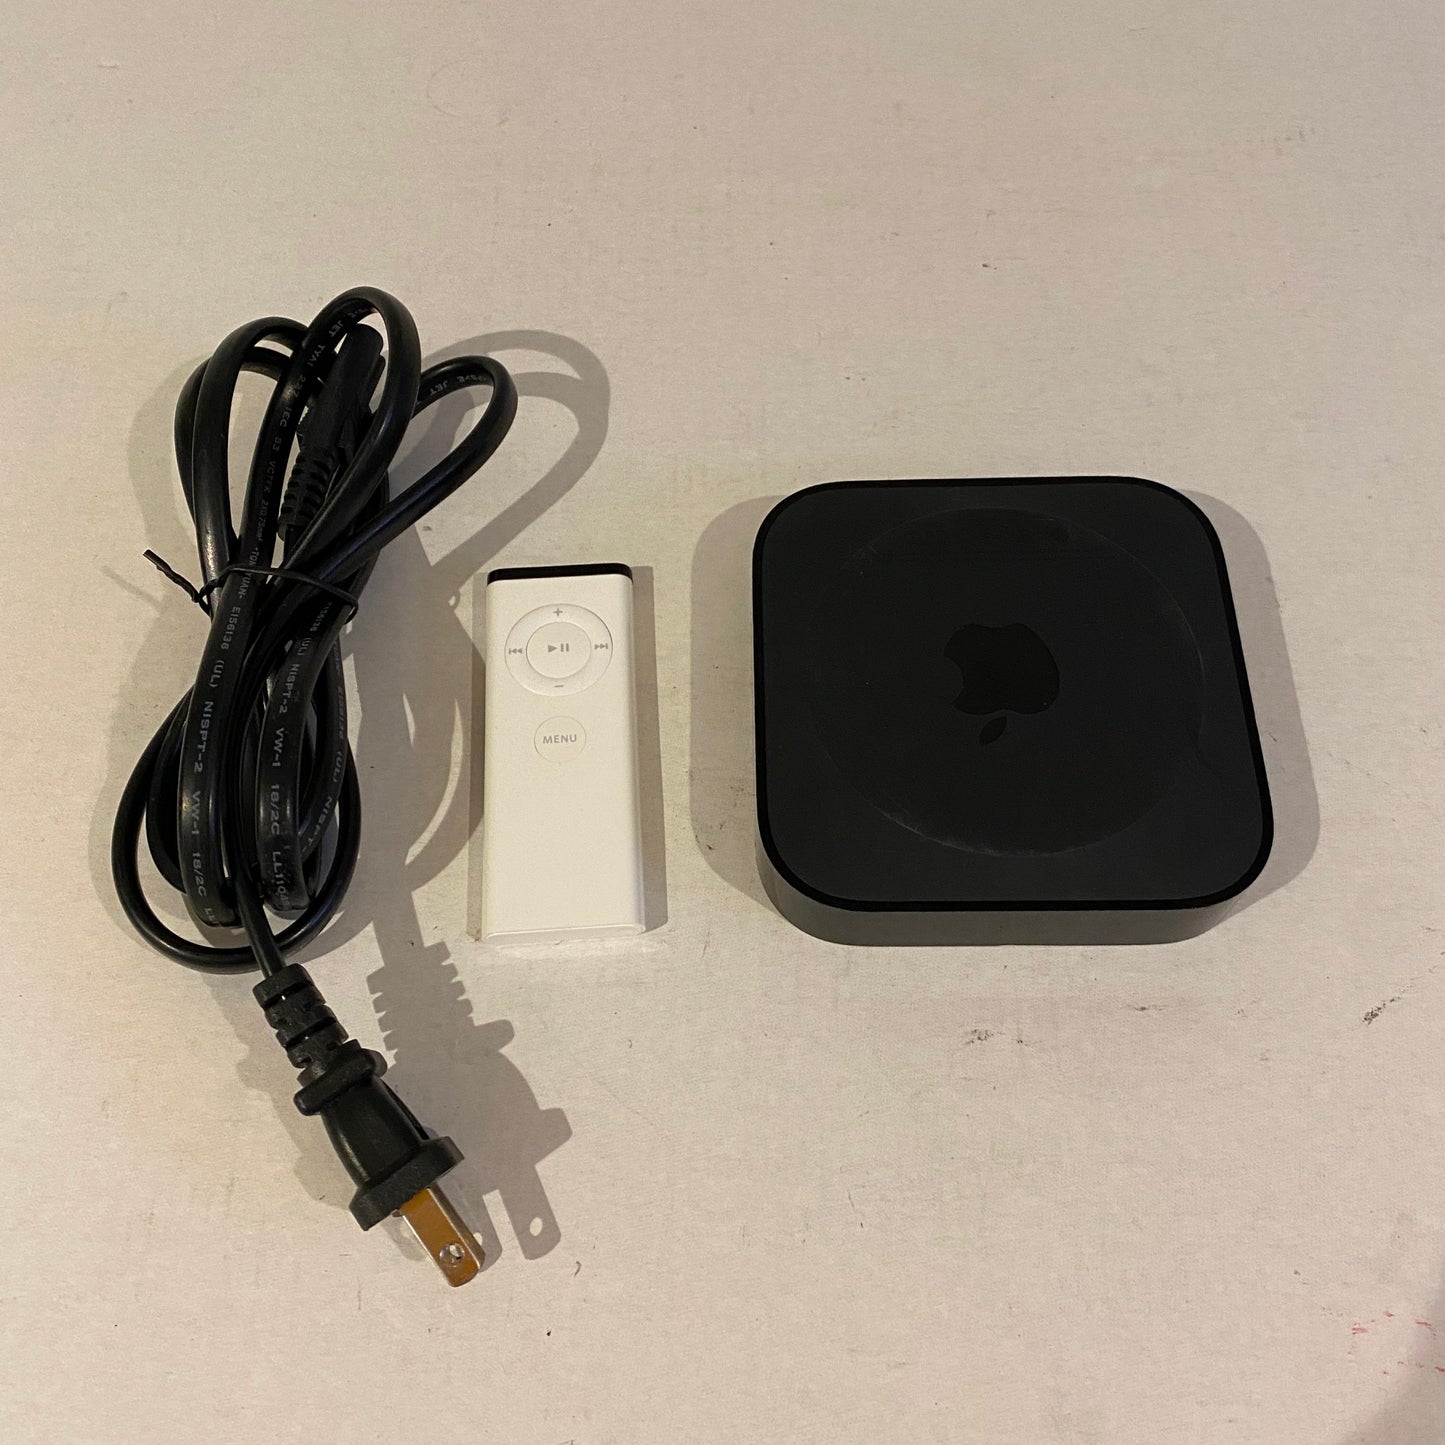 Apple TV (2nd Generation) with remote - A1378